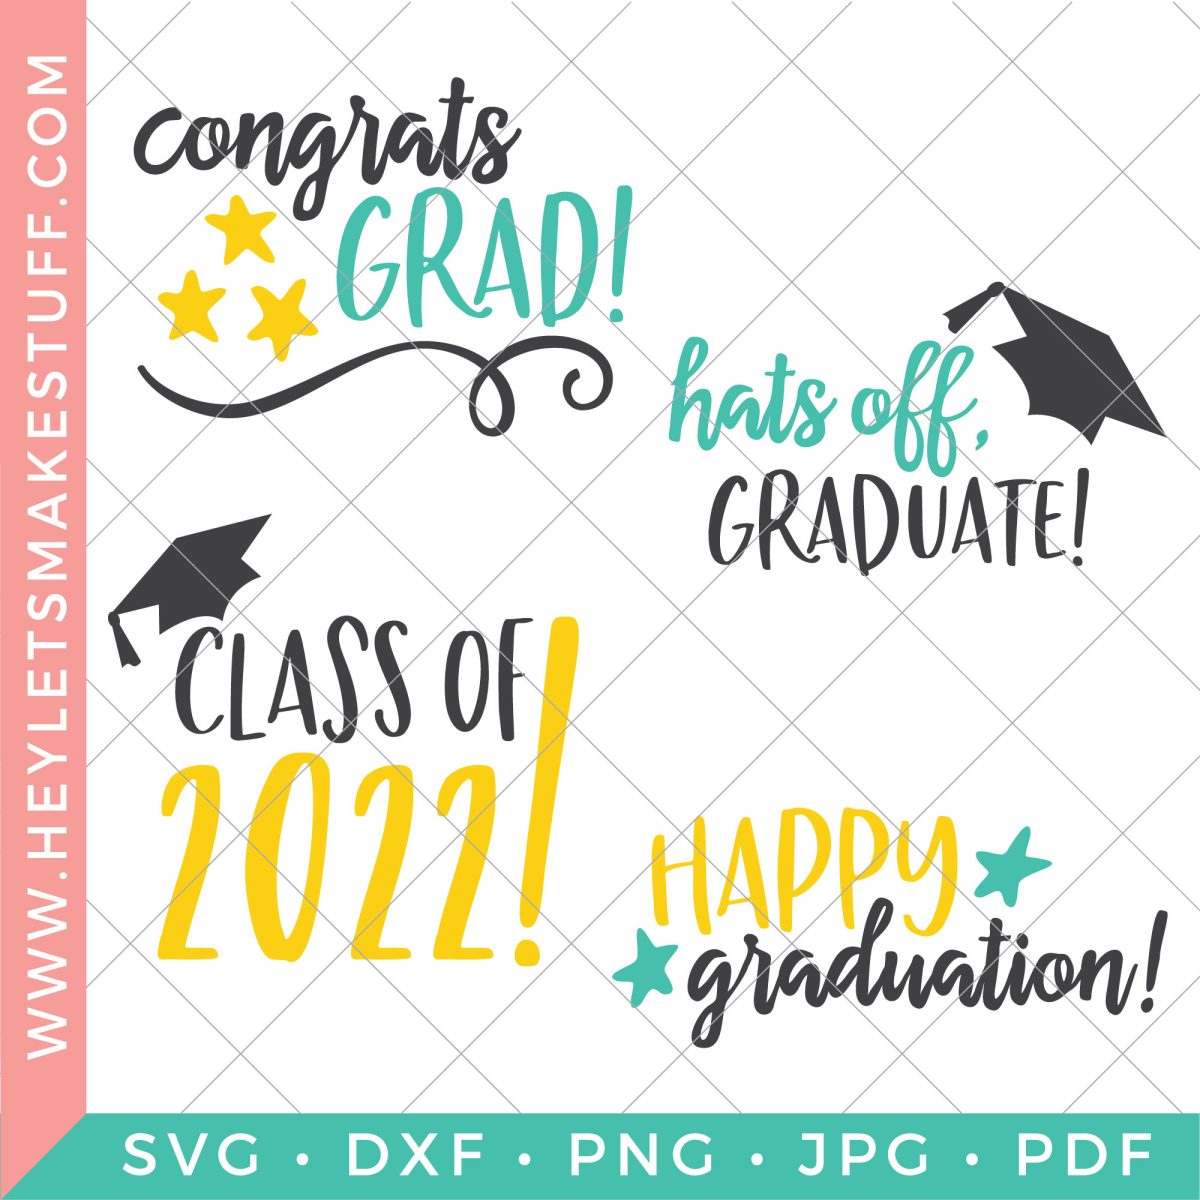 Four SVG files in this bundle: "Congrats Grad" with stars, "Hats off, Graduate", "Class of 2022" and "Happy Graduation."